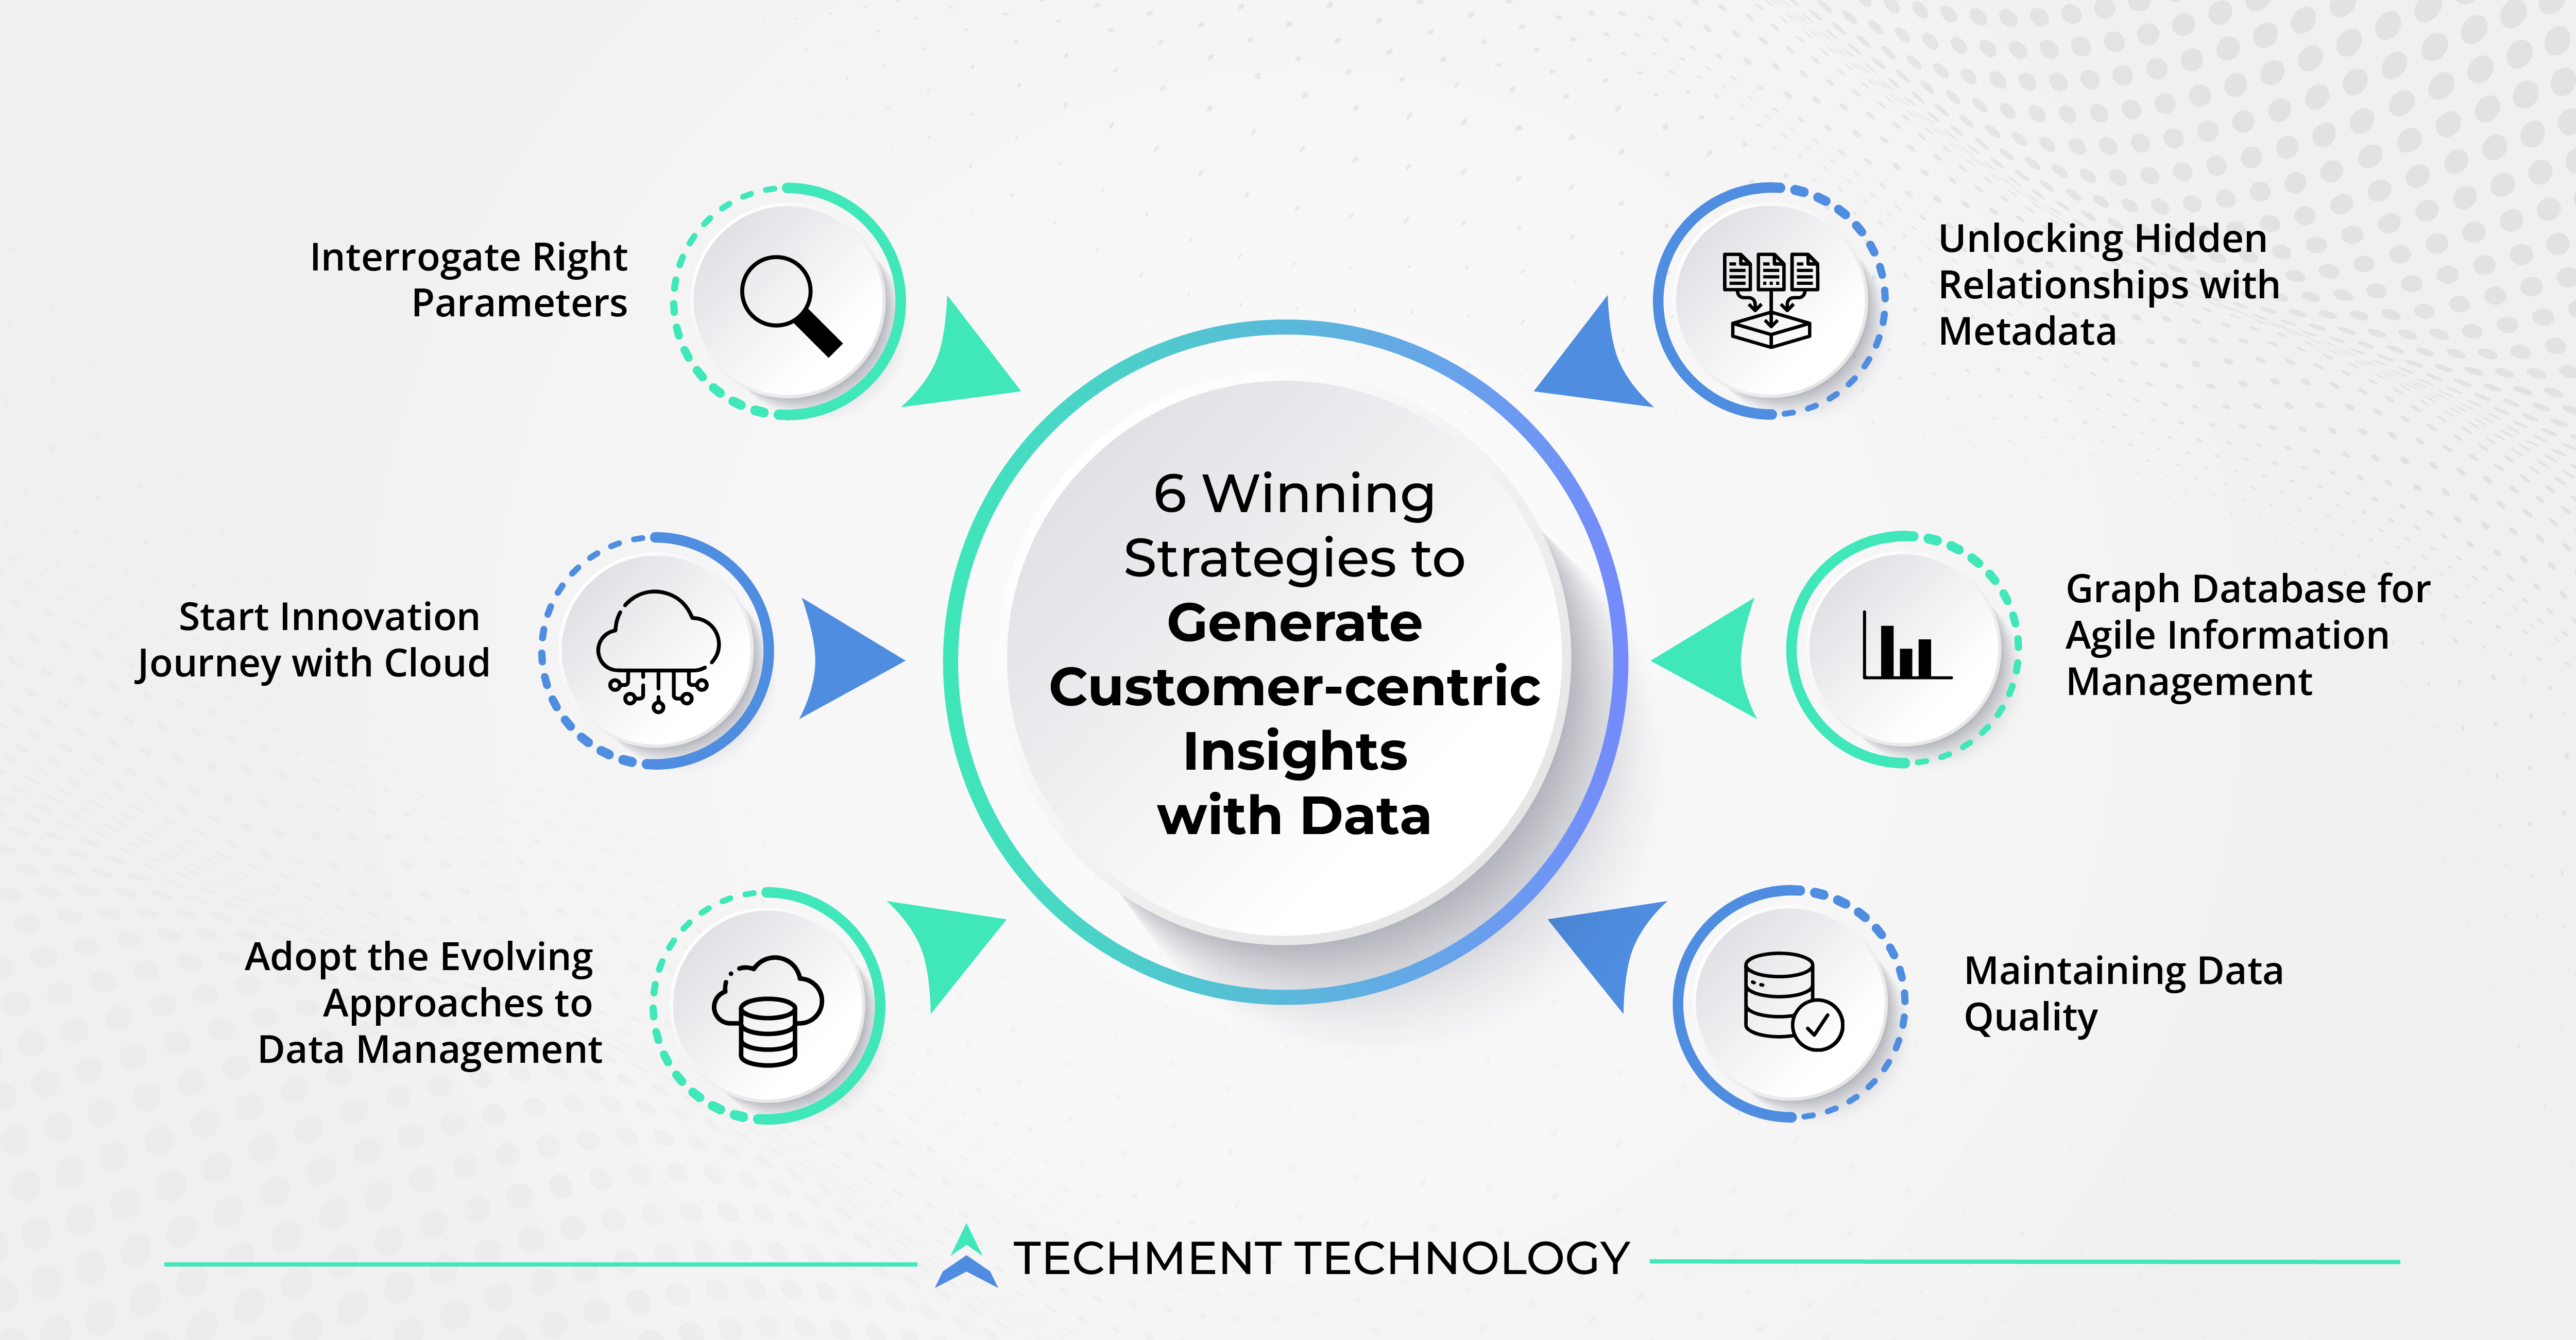 5 Winning Strategies to Generate Customer-centric Insights with Data